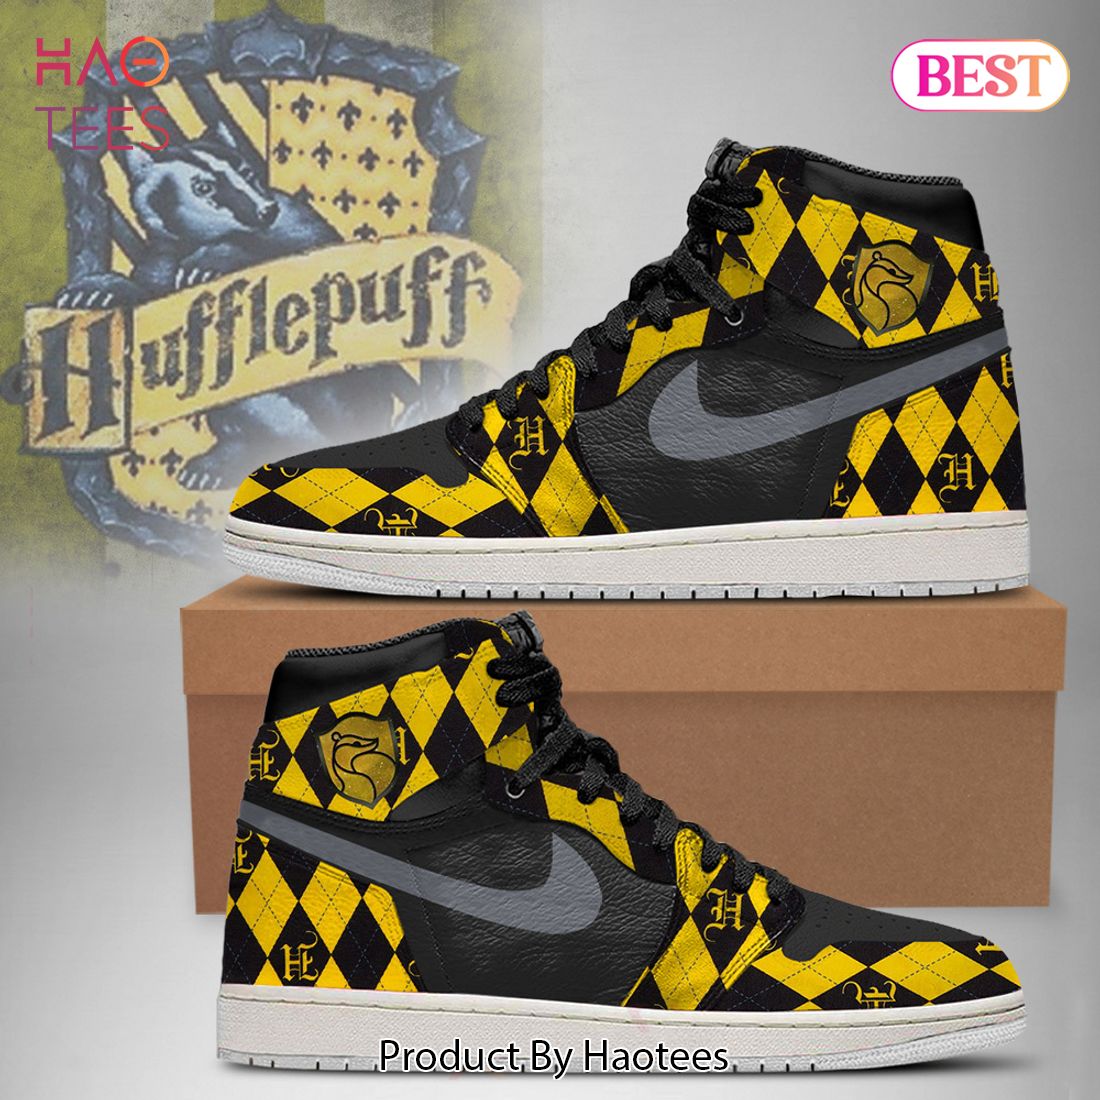 Wizarding World on X: Heads up to all Harry Potter Fan Club members - The  Limited Edition Harry Potter x @KSwiss Firebolt shoes are out now: 👉   / X